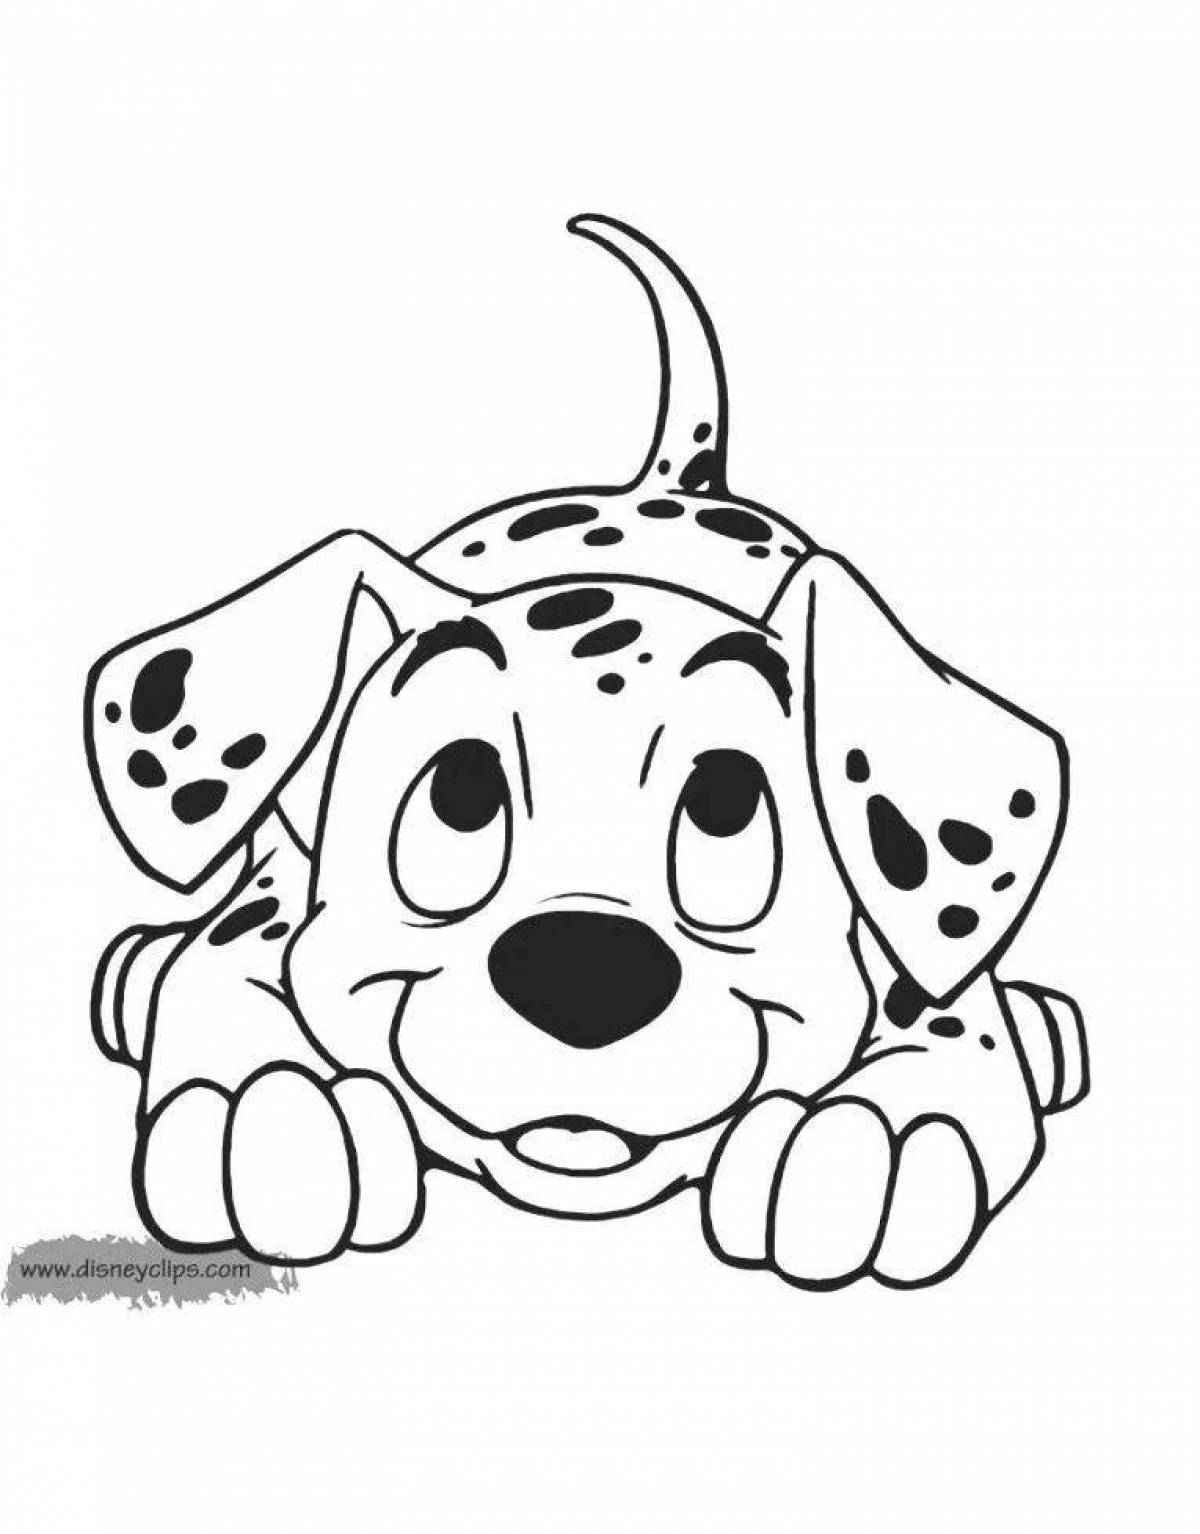 Animated dog face coloring page